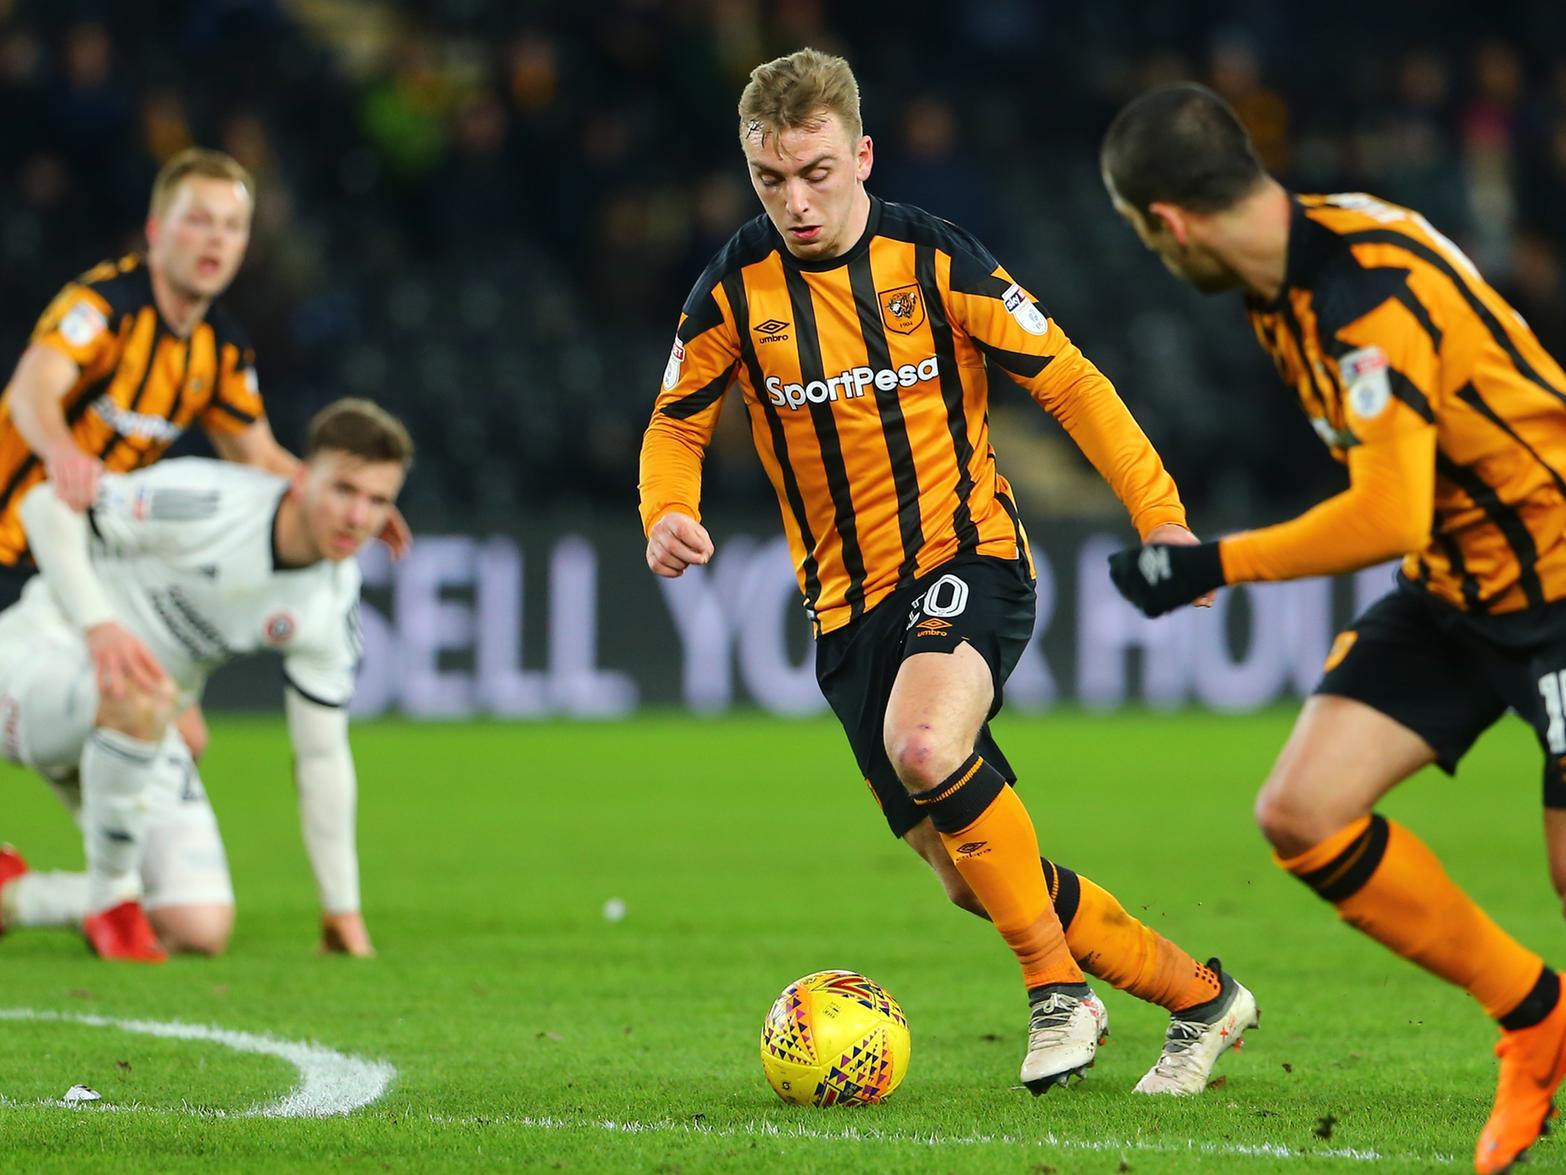 Ex-footballer Kevin Phillips has suggested that Leeds United should look to capture Hull City talisman Jarrod Bowen in January, claiming that he could boost their hopes of promotion. (HITC)